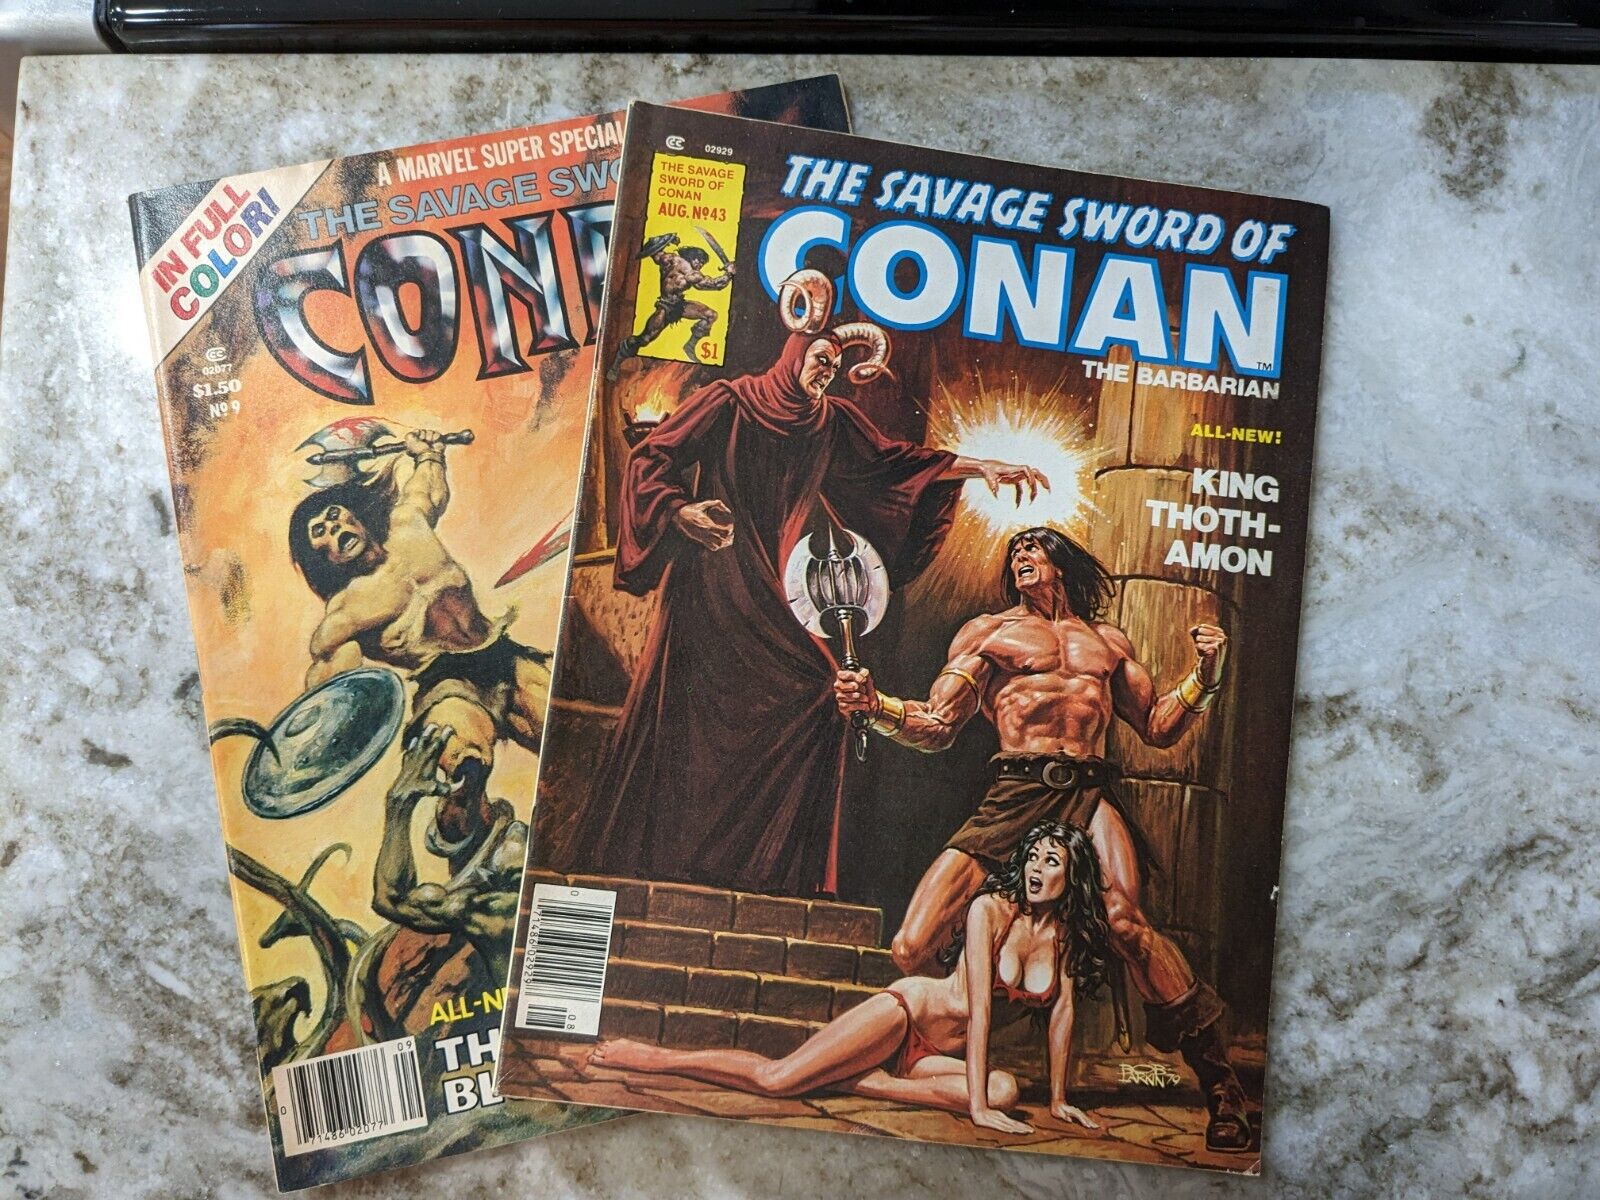 2- The Savage Sword of Conan The Barbarian, Very Good Condition